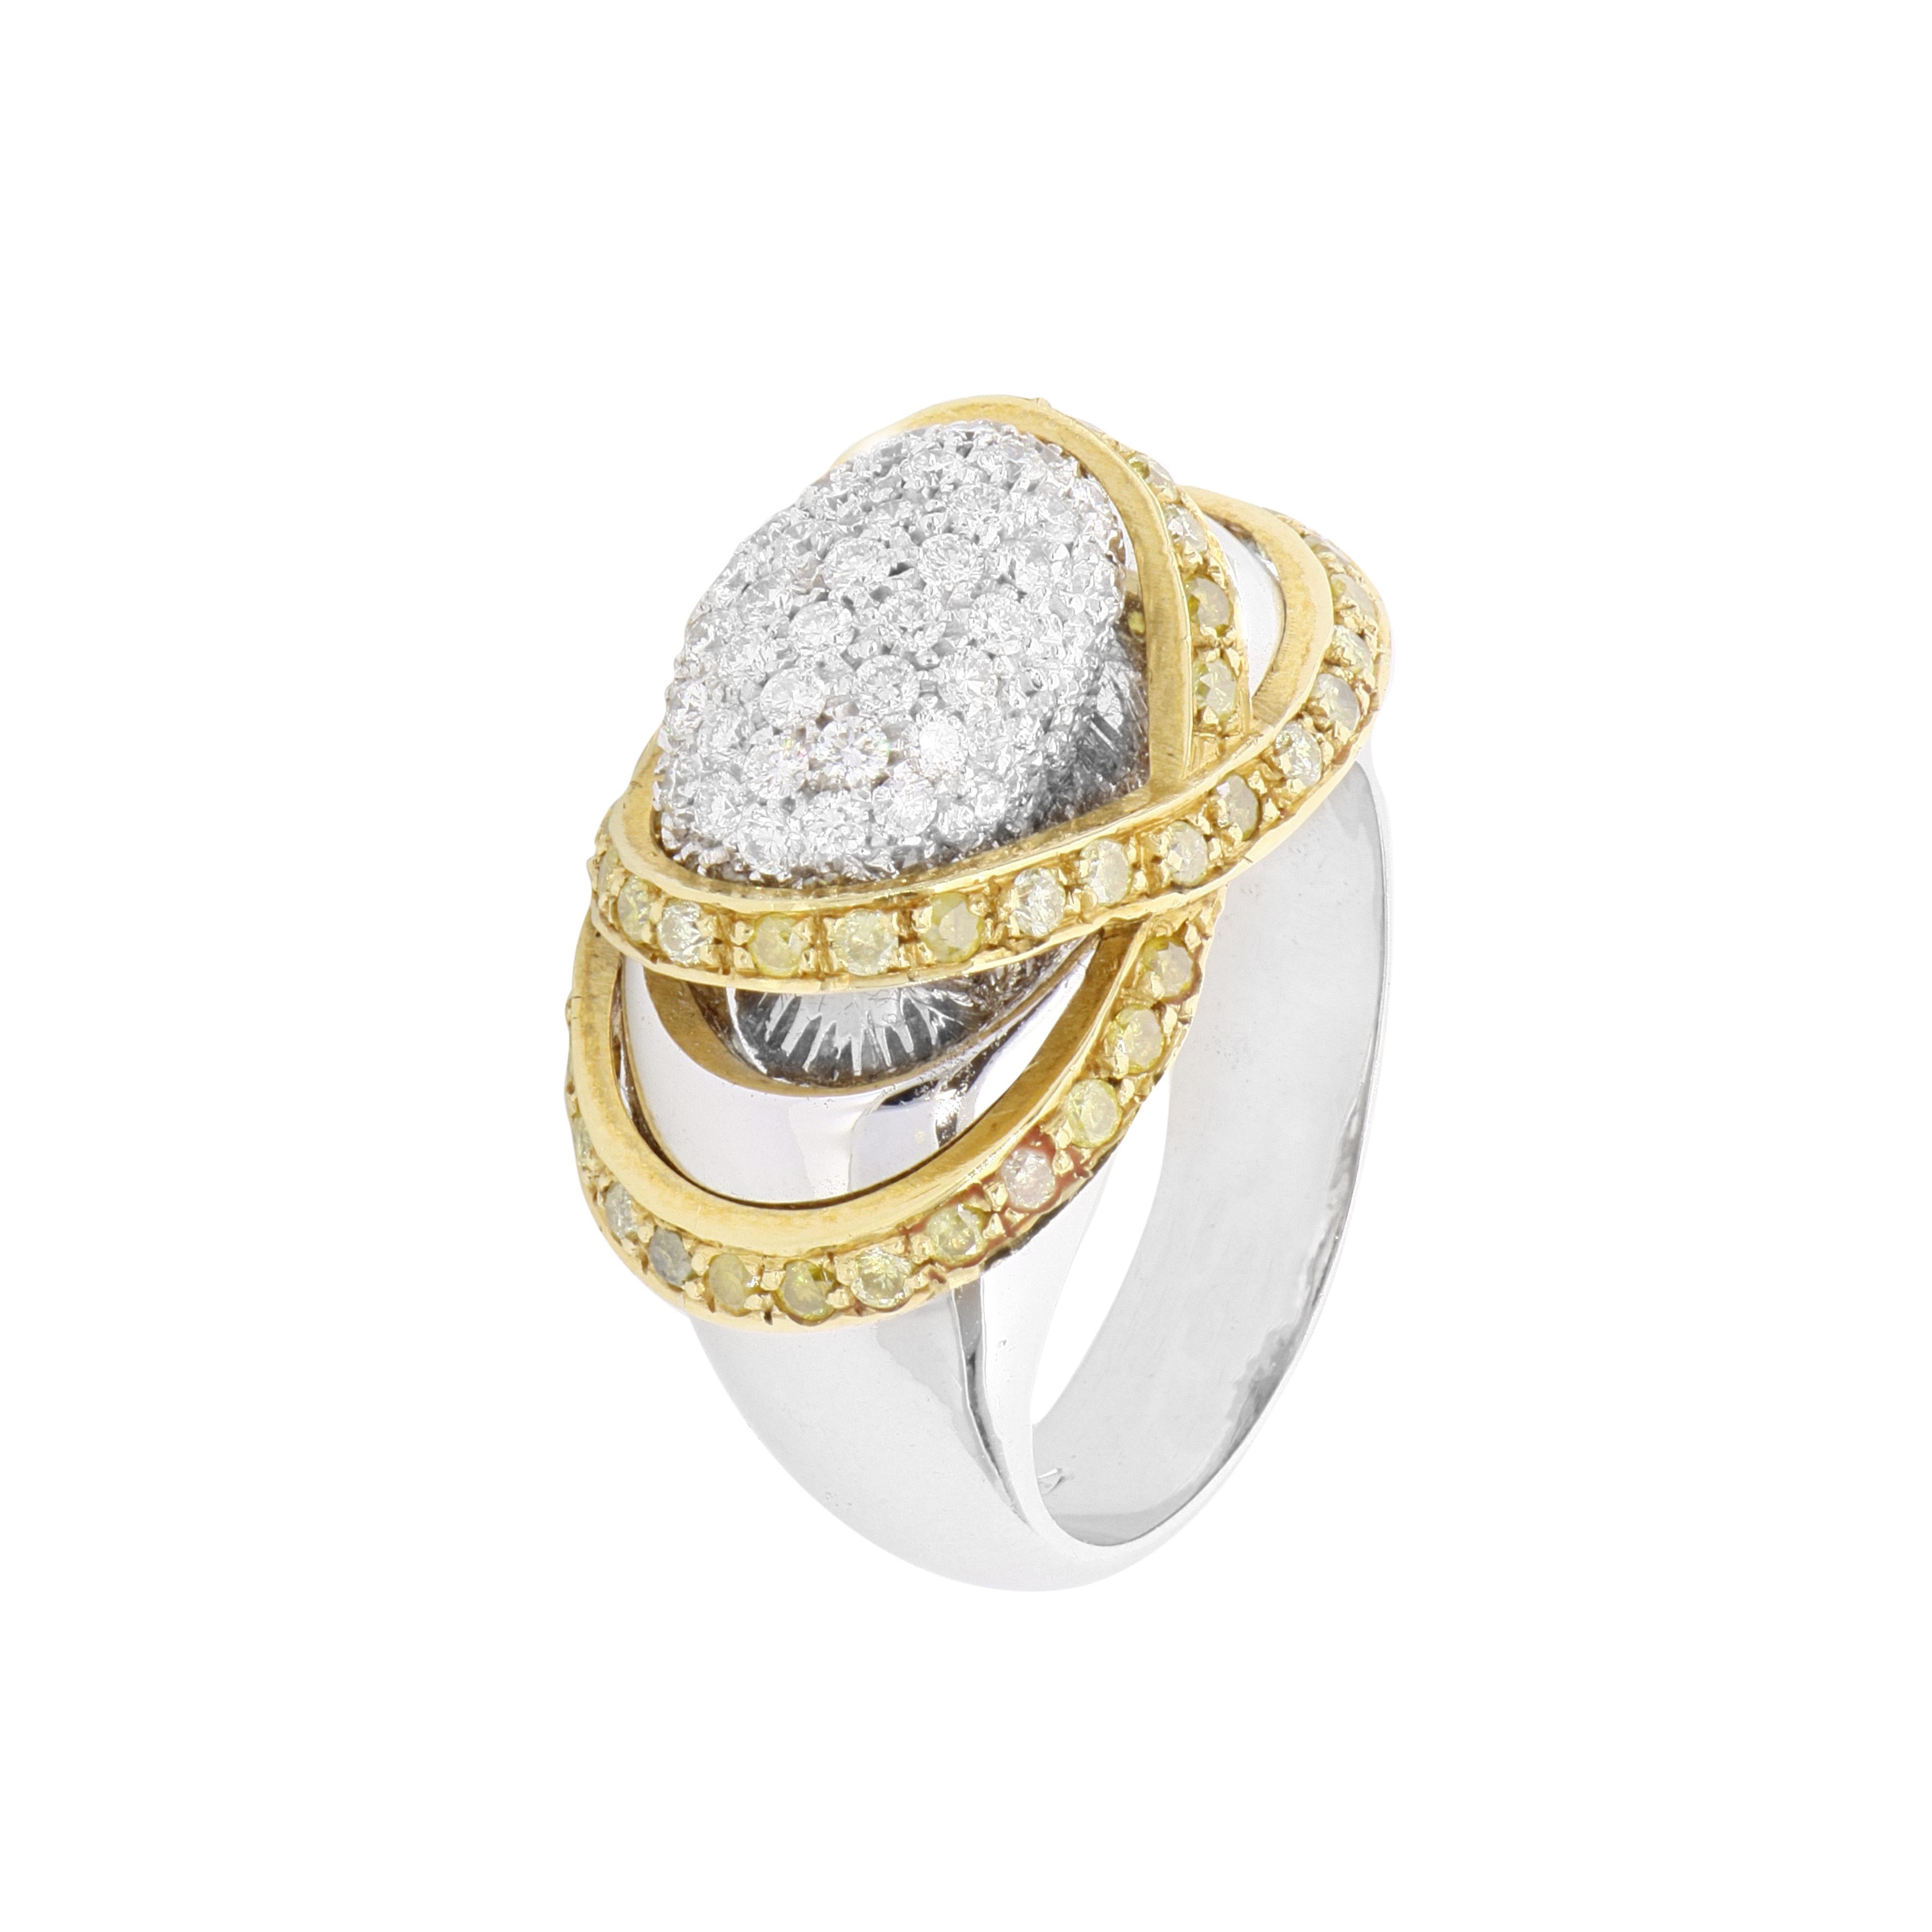 For Sale:  Fancy and colorless diamonds pavè engagement wedding ring 2